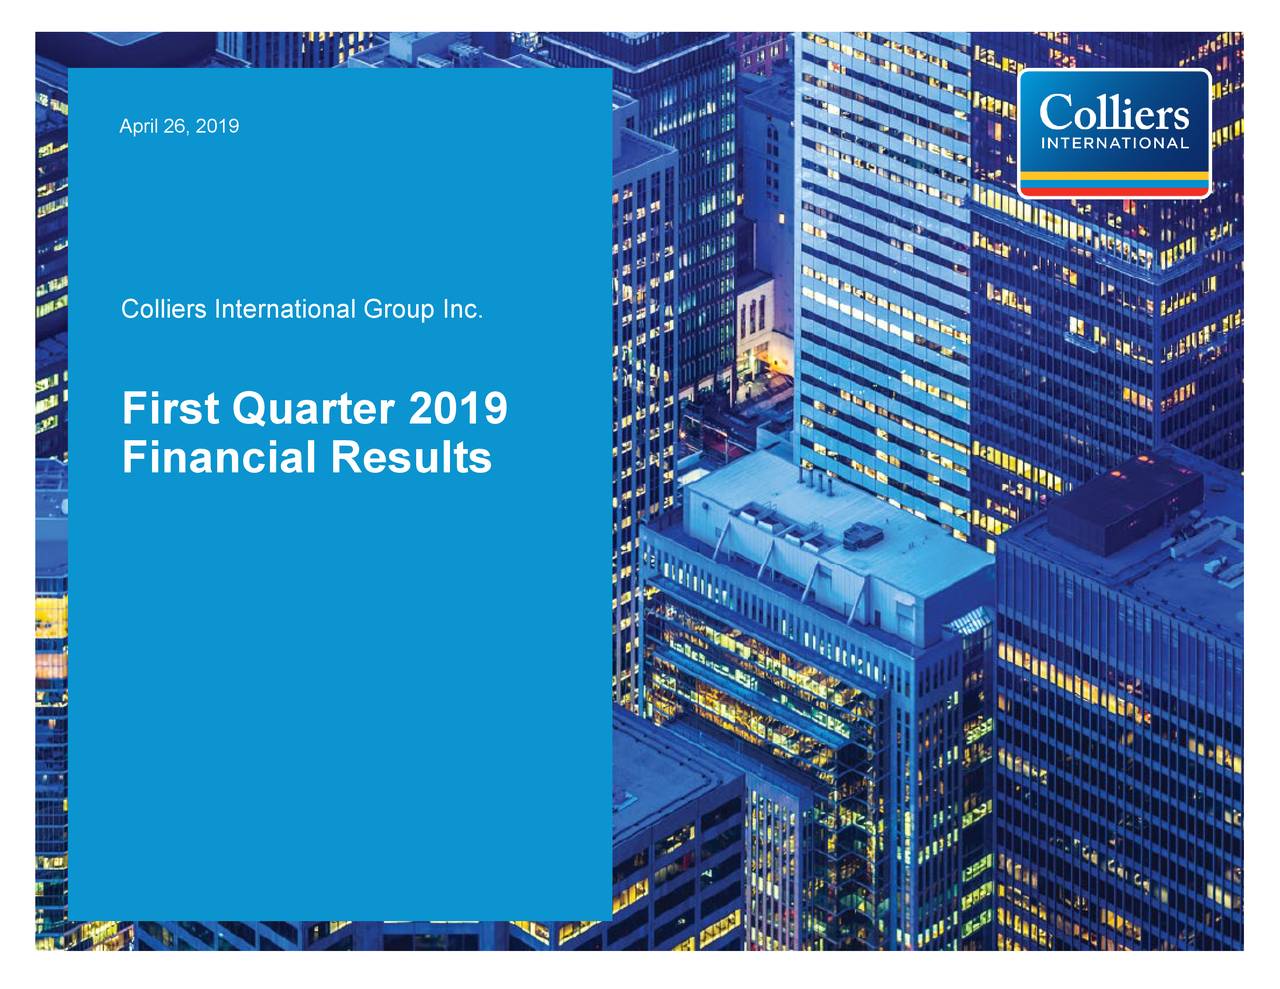 Colliers International Group Inc. First Quarter 2019 Financial Results